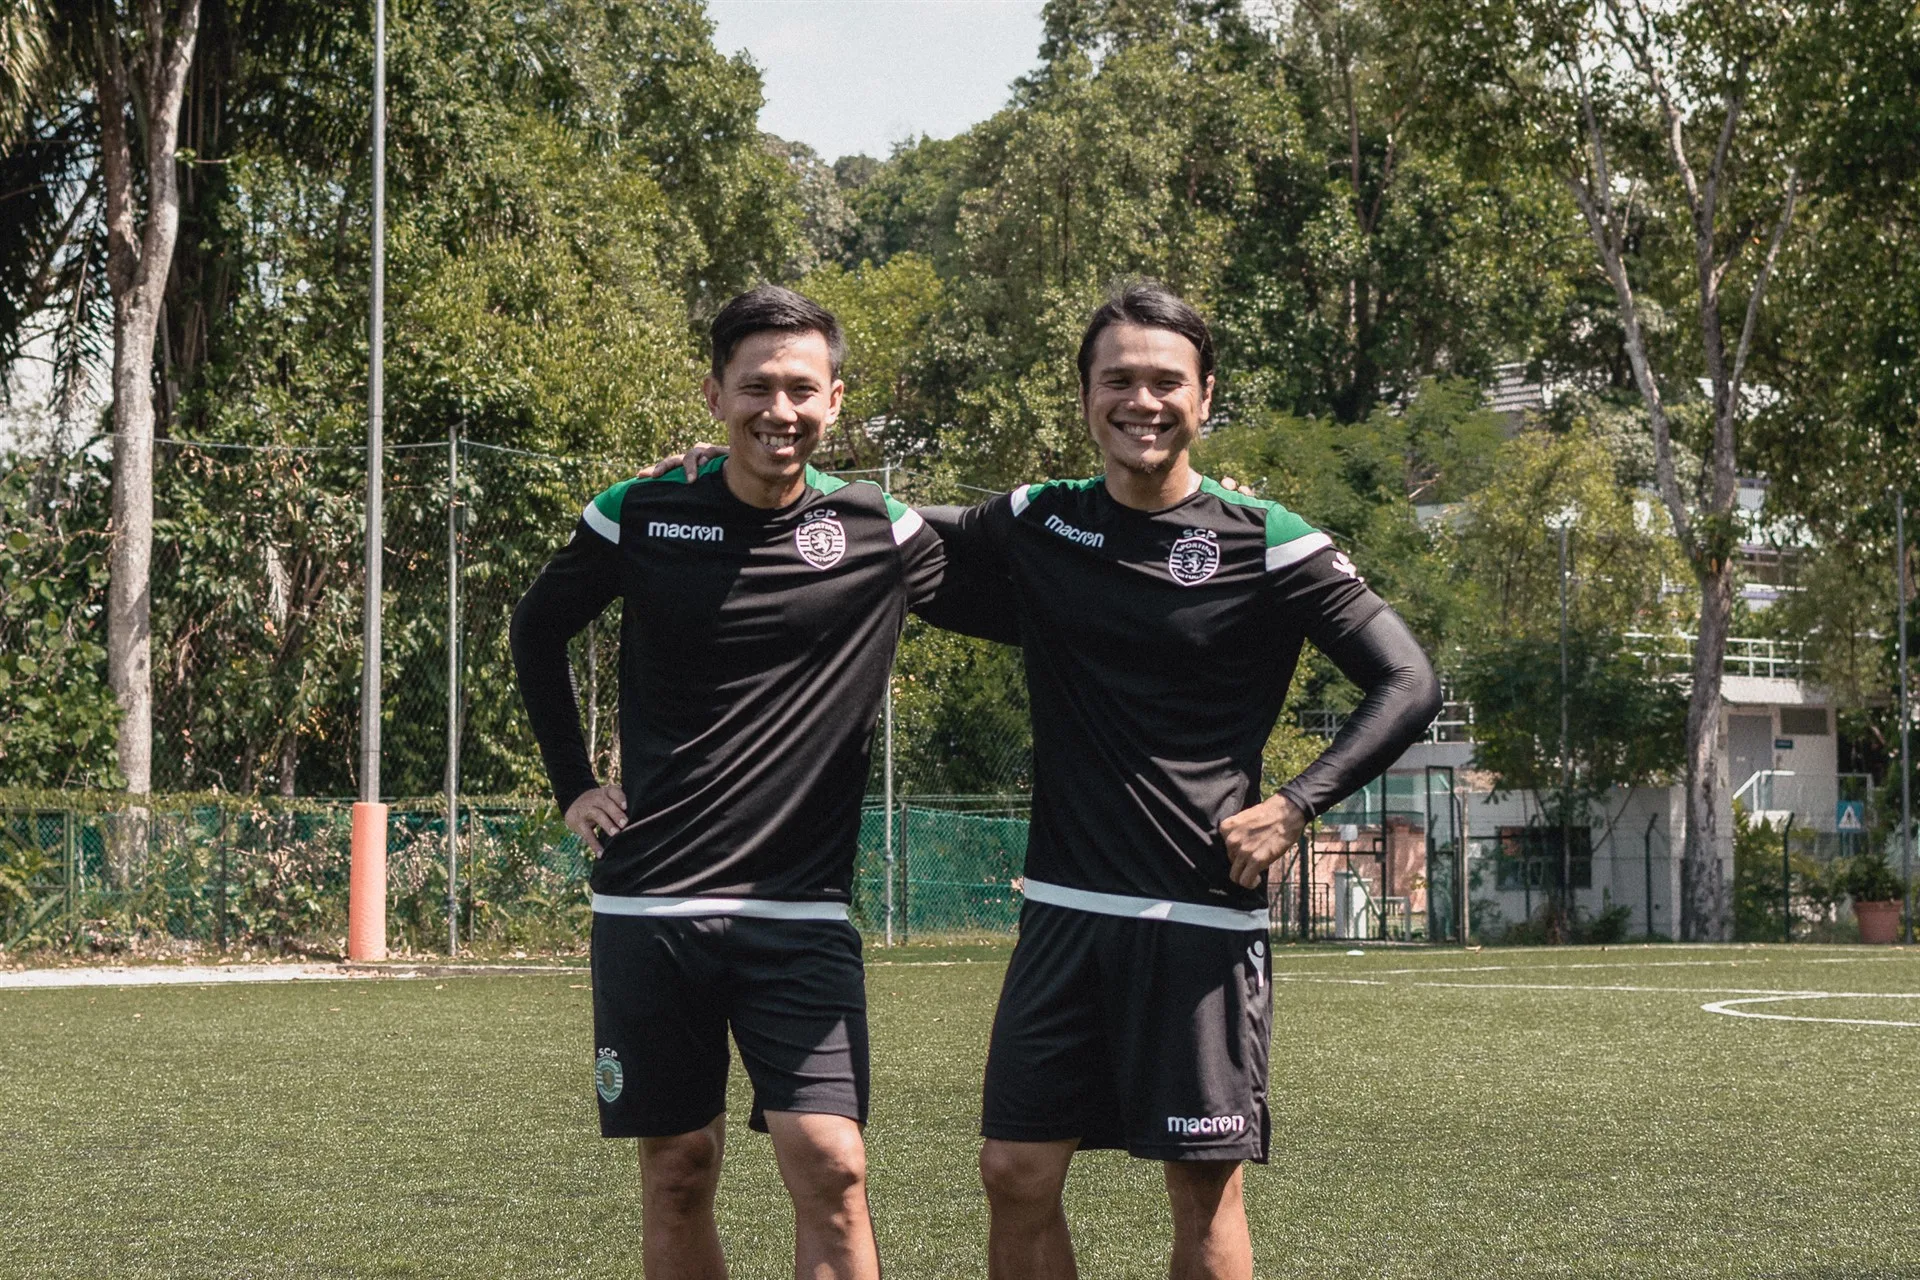 Terry Lee and Terence Ong from Urban Street Team coaching at the Sporting Lisbon Academy